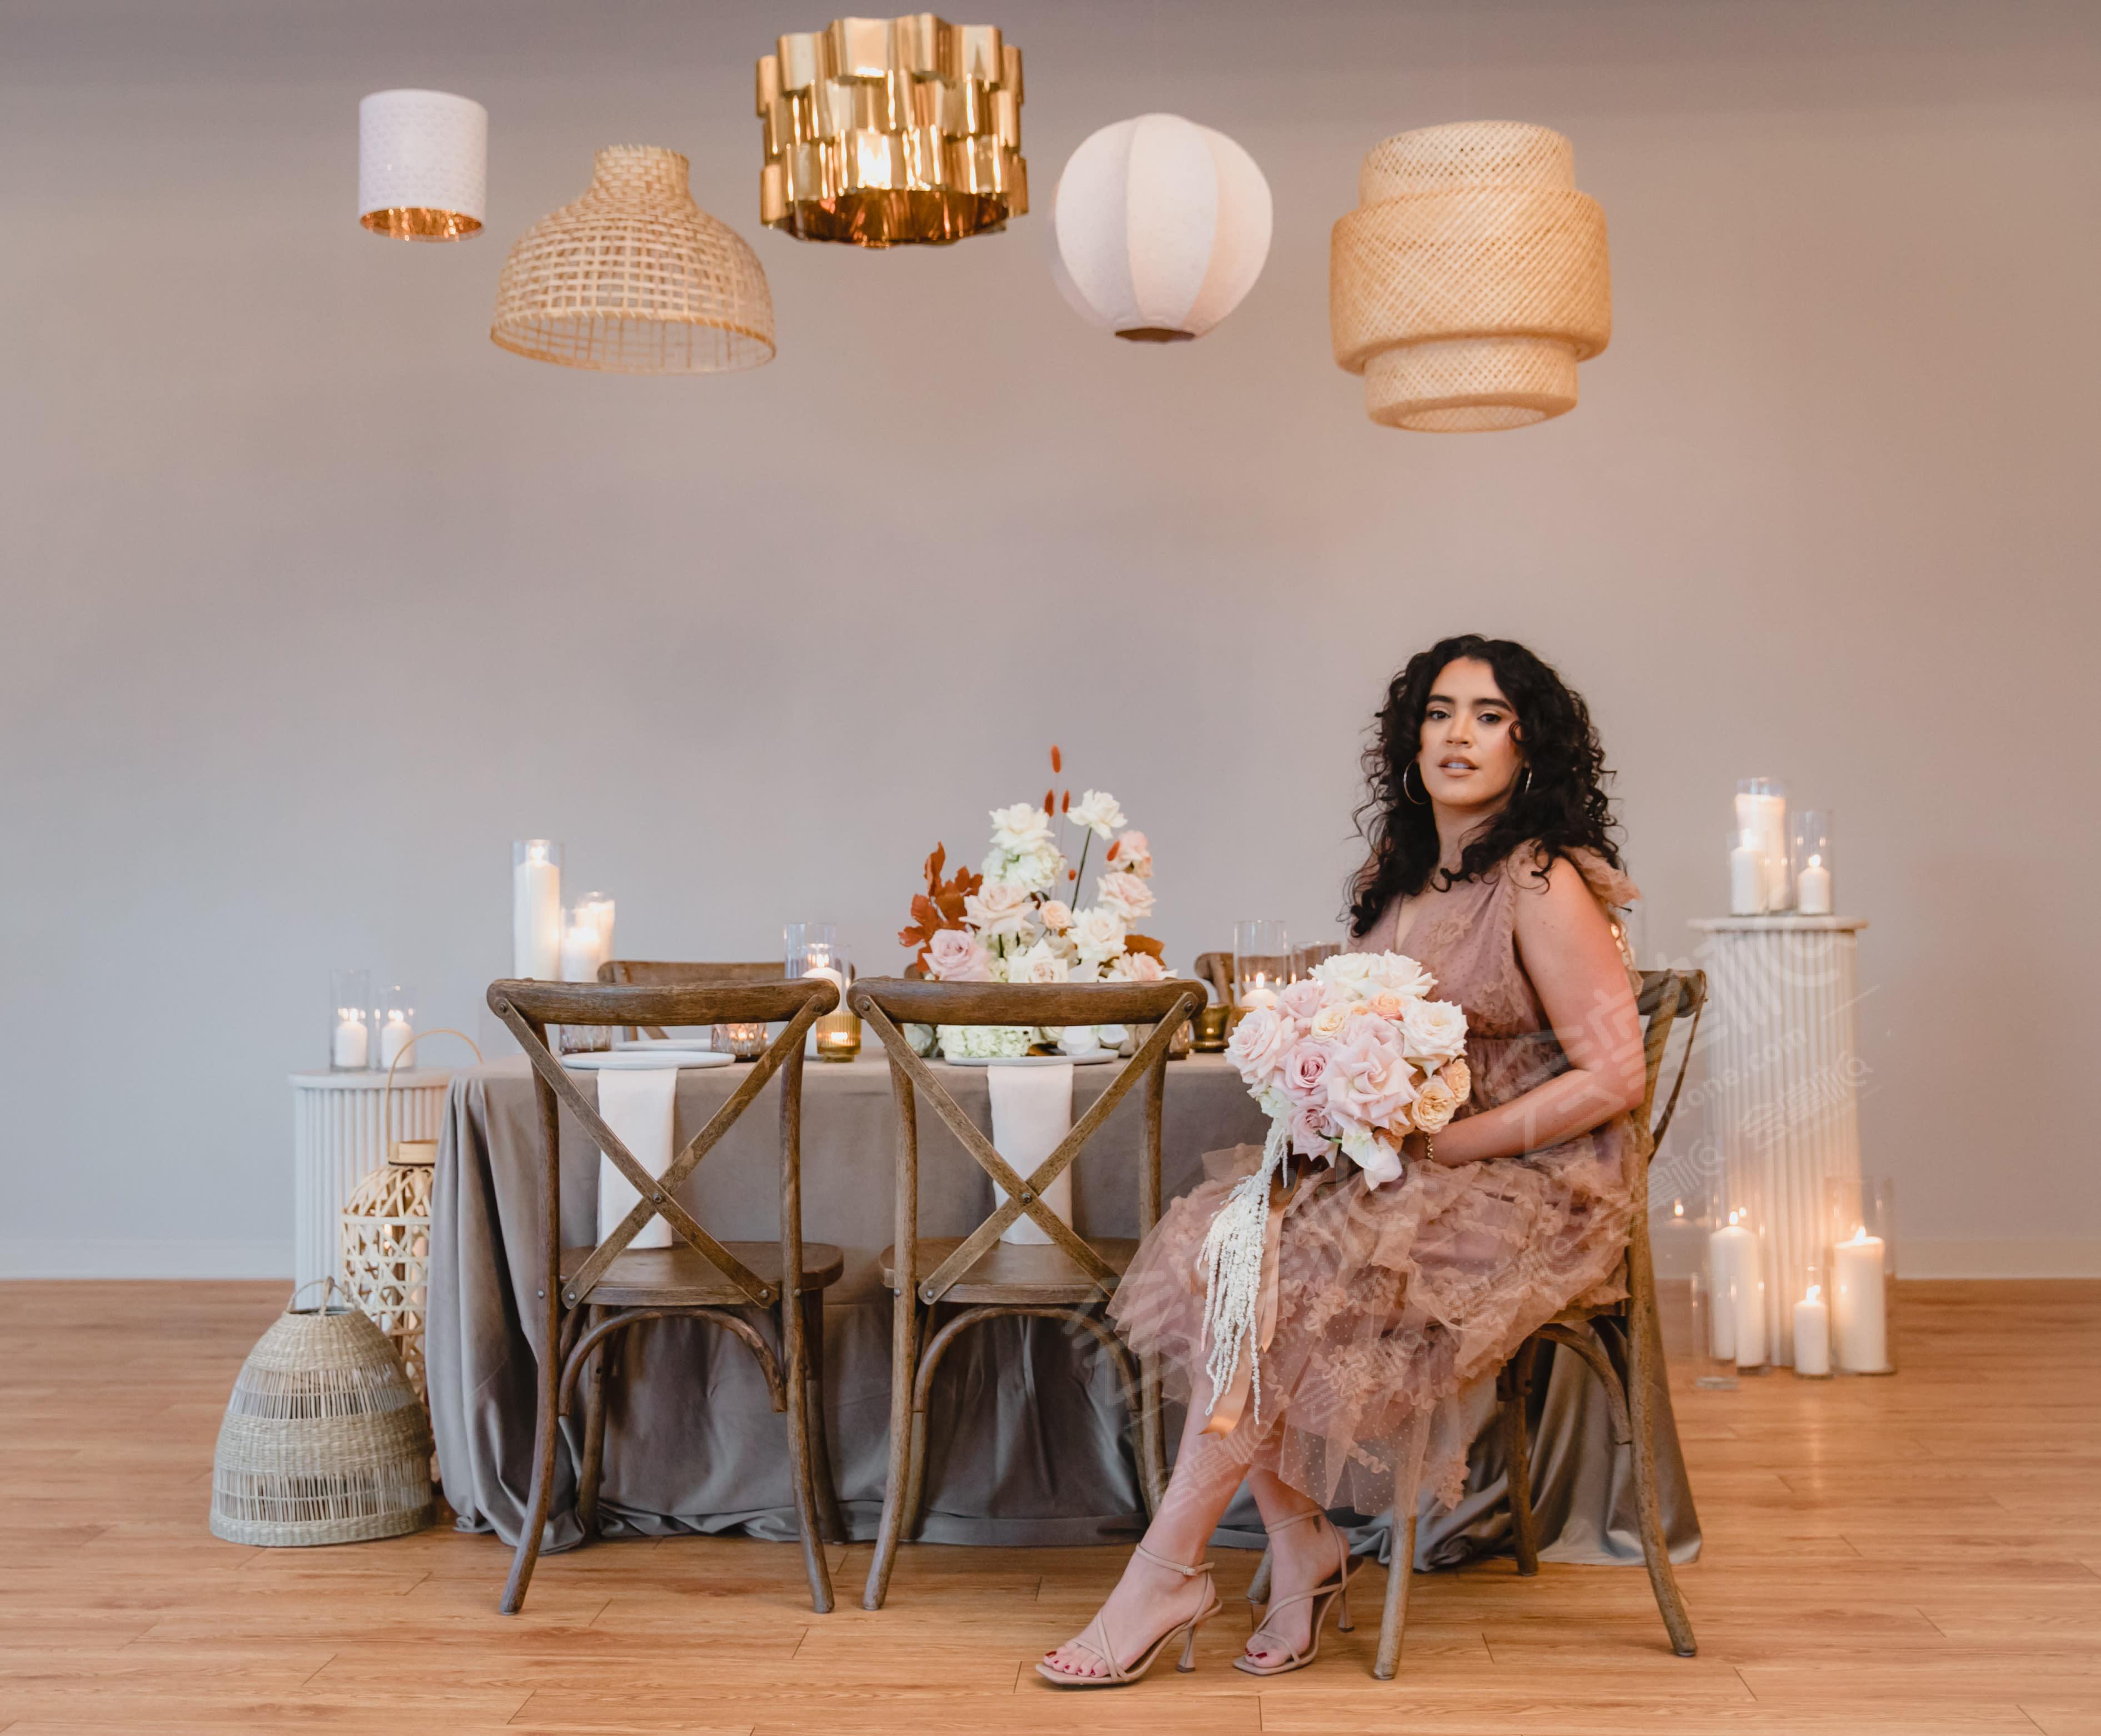 Vintage Glam aesthetic with a touch of Rustic Elegance